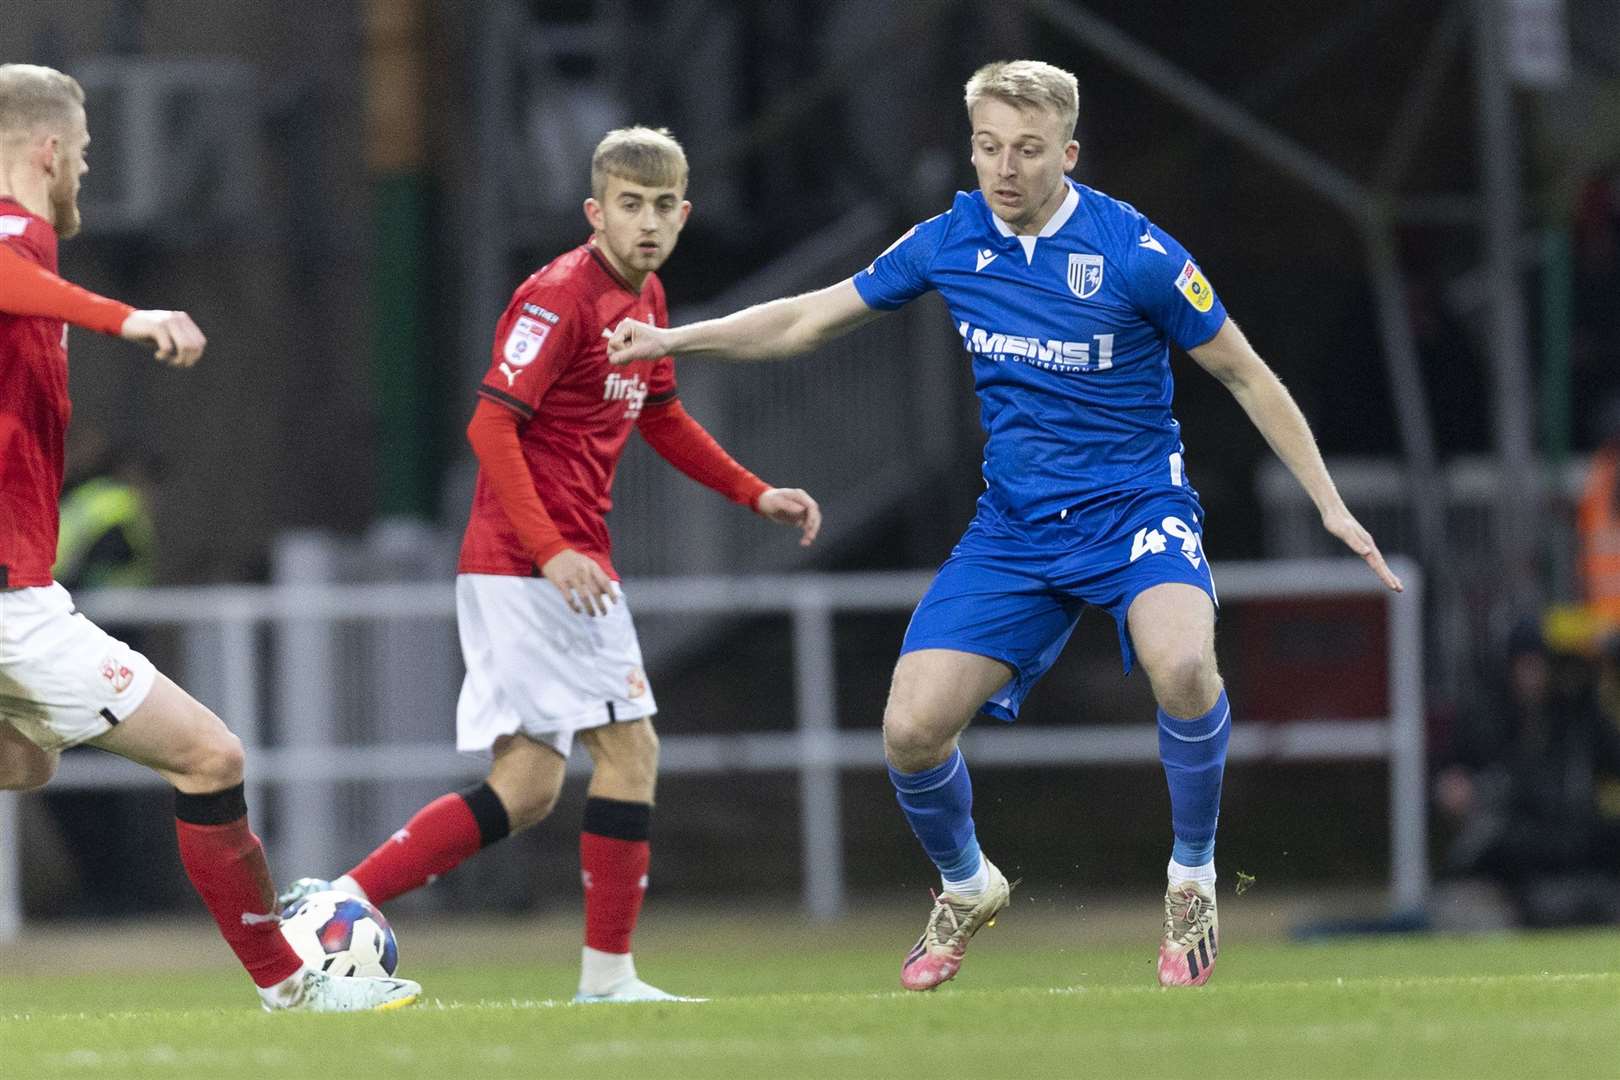 George Lapslie in action for the Gills - one of eight signings in the January transfer window